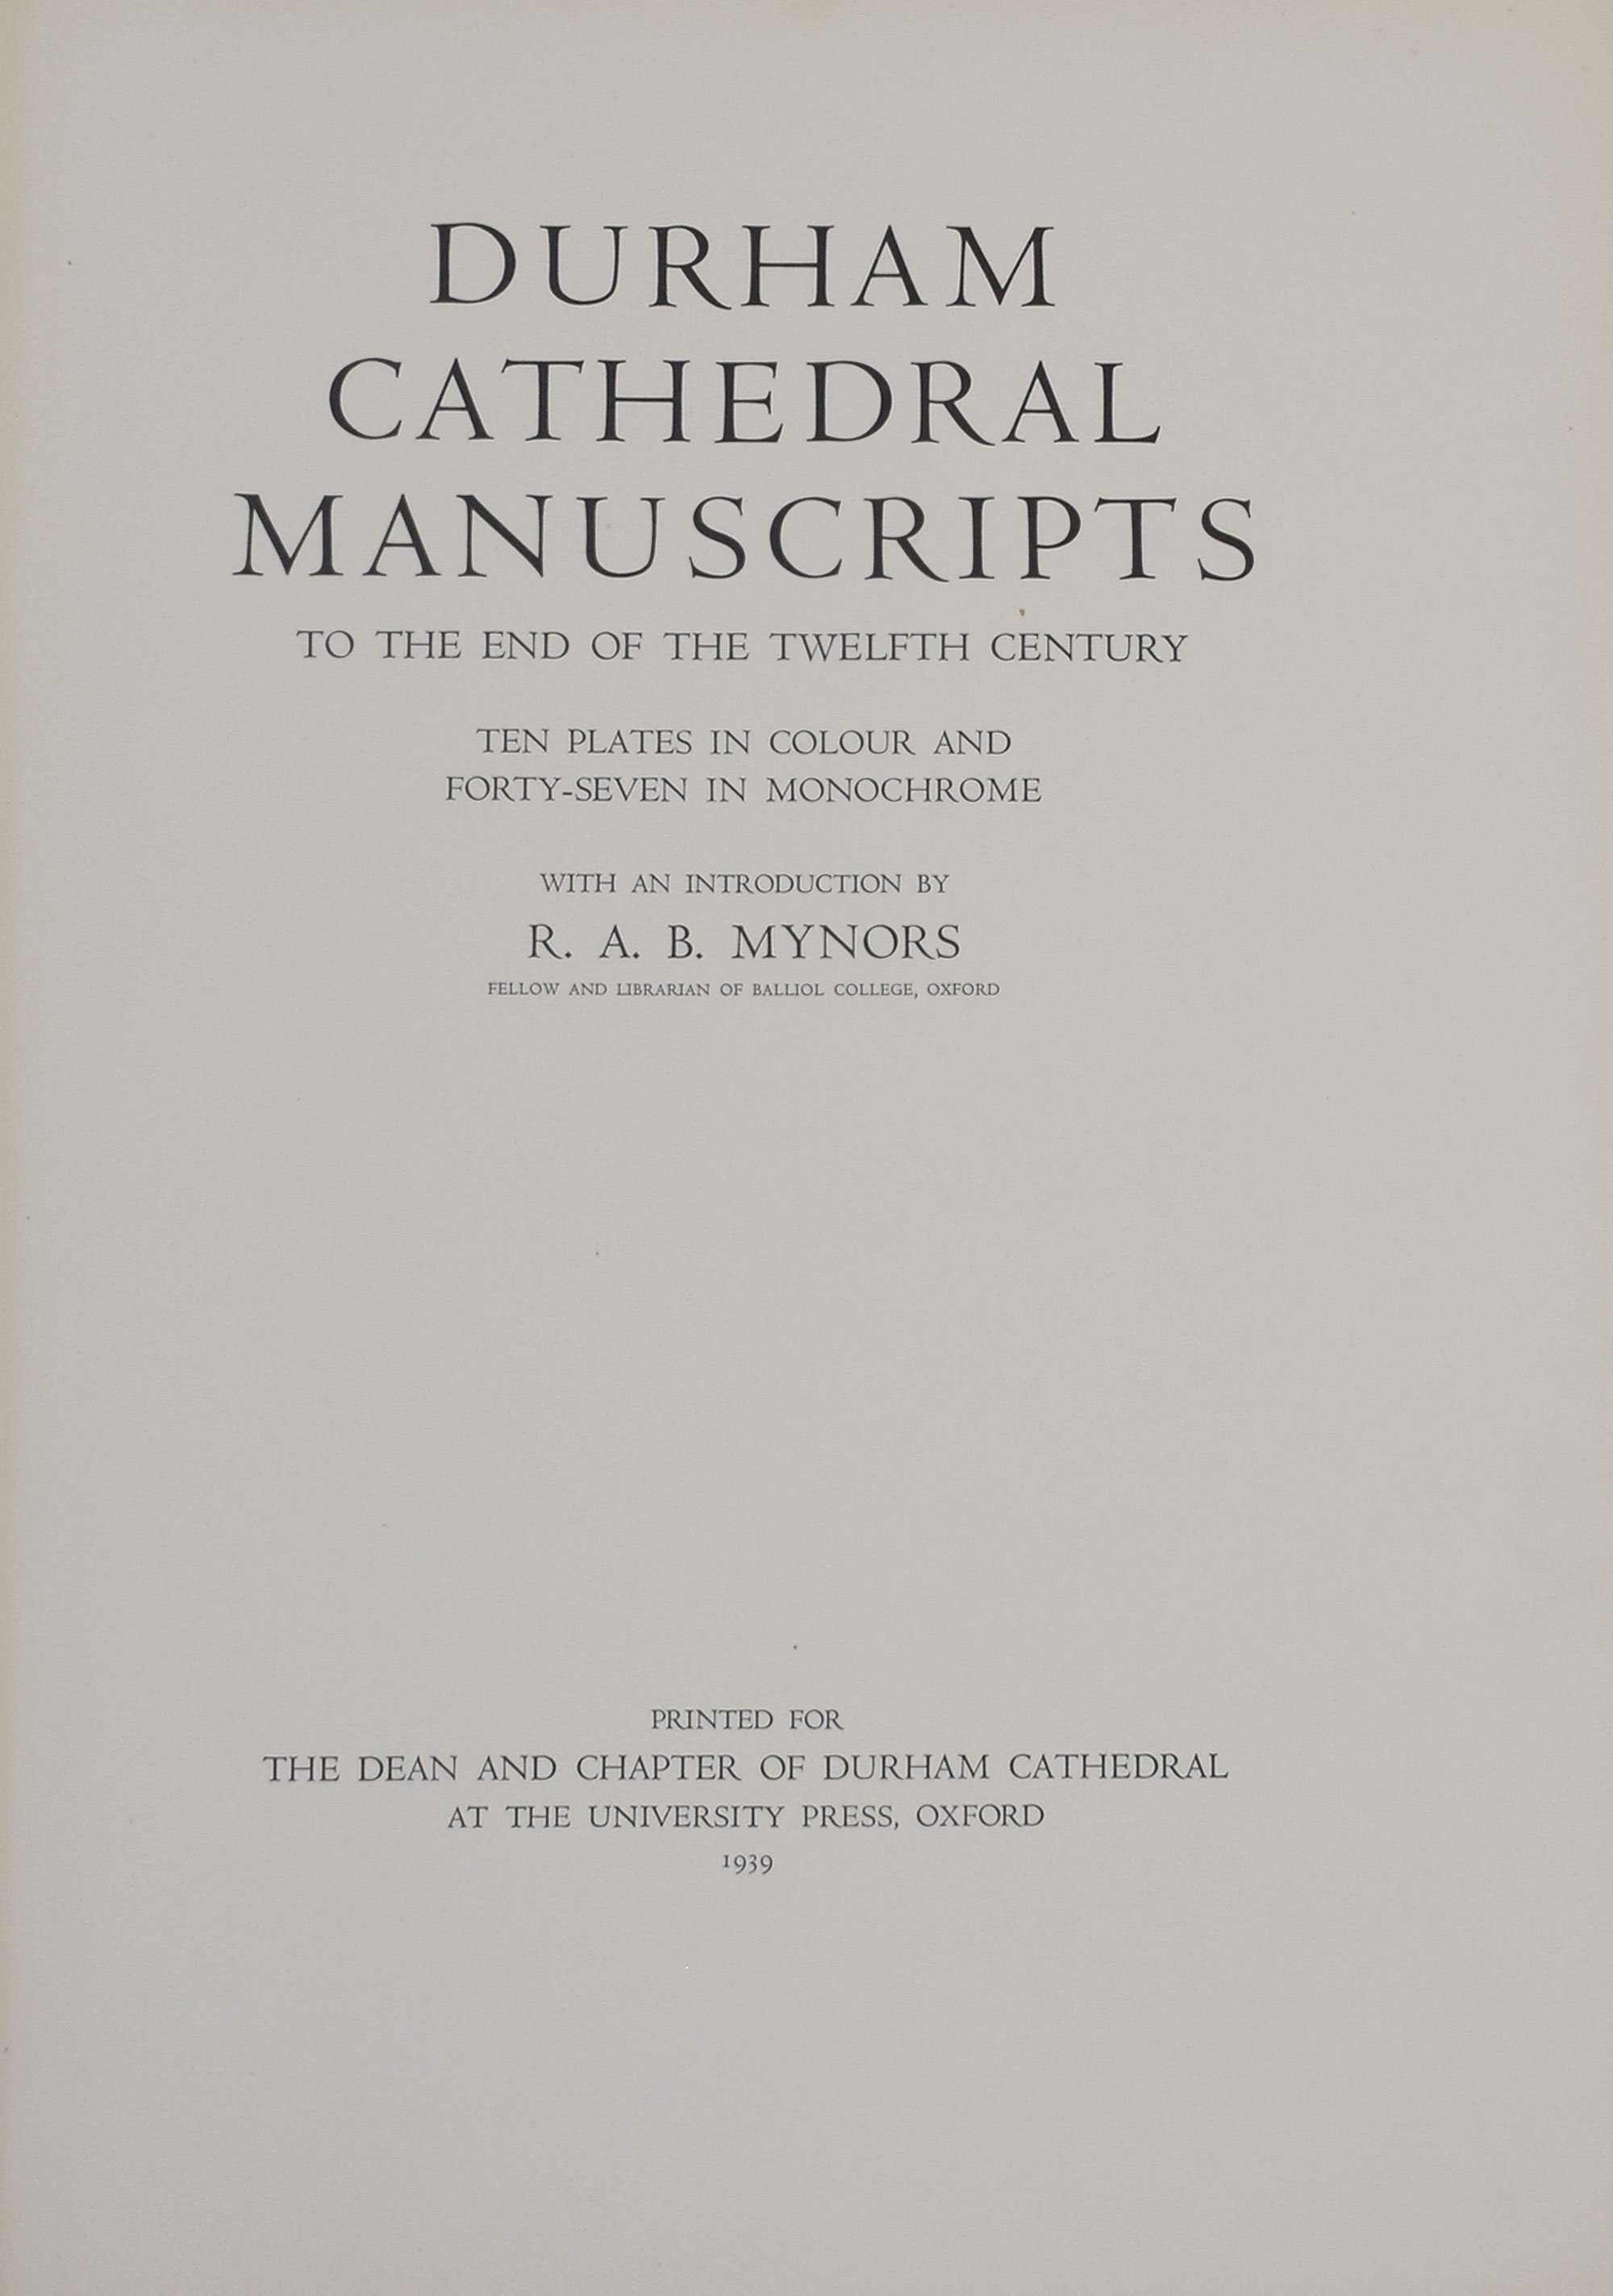 Durham Cathedral Manuscripts to the End of the Twelfth Century. Limited edition.